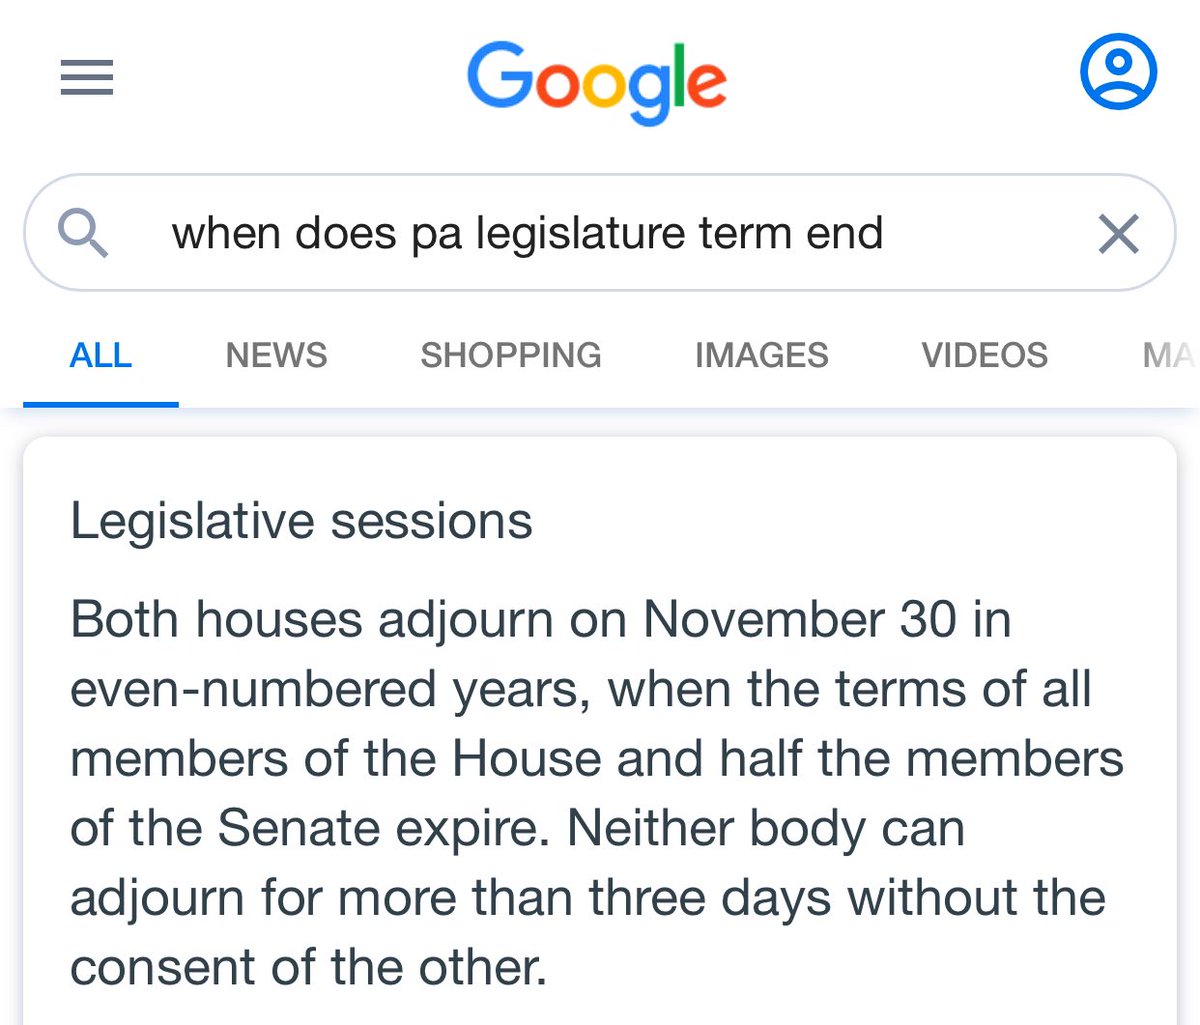 The GOP lawsuits are so dopey that if PA doesn’t certify the vote, after November 30th, we literally don’t have a PA House + 1/2 of the Senate, both of which are controlled by Republicans. And they accuse me of smoking too much weed.